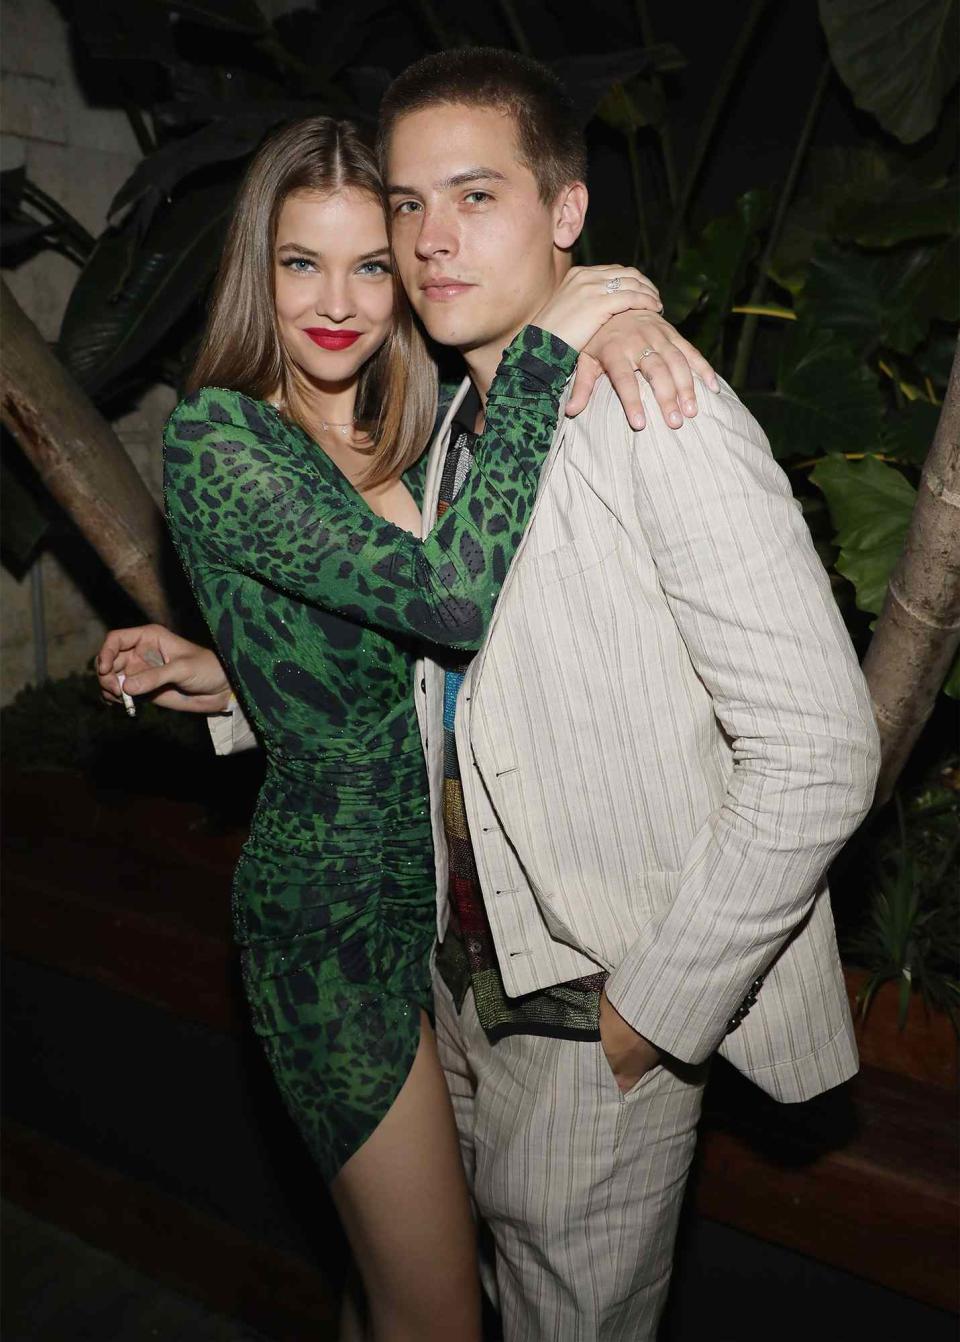 Barbara Palvin and Dylan Sprouse attend the Sports Illustrated Swimsuit 2019 Issue Launch at Seaspice on May 10, 2019 in Miami, Florida